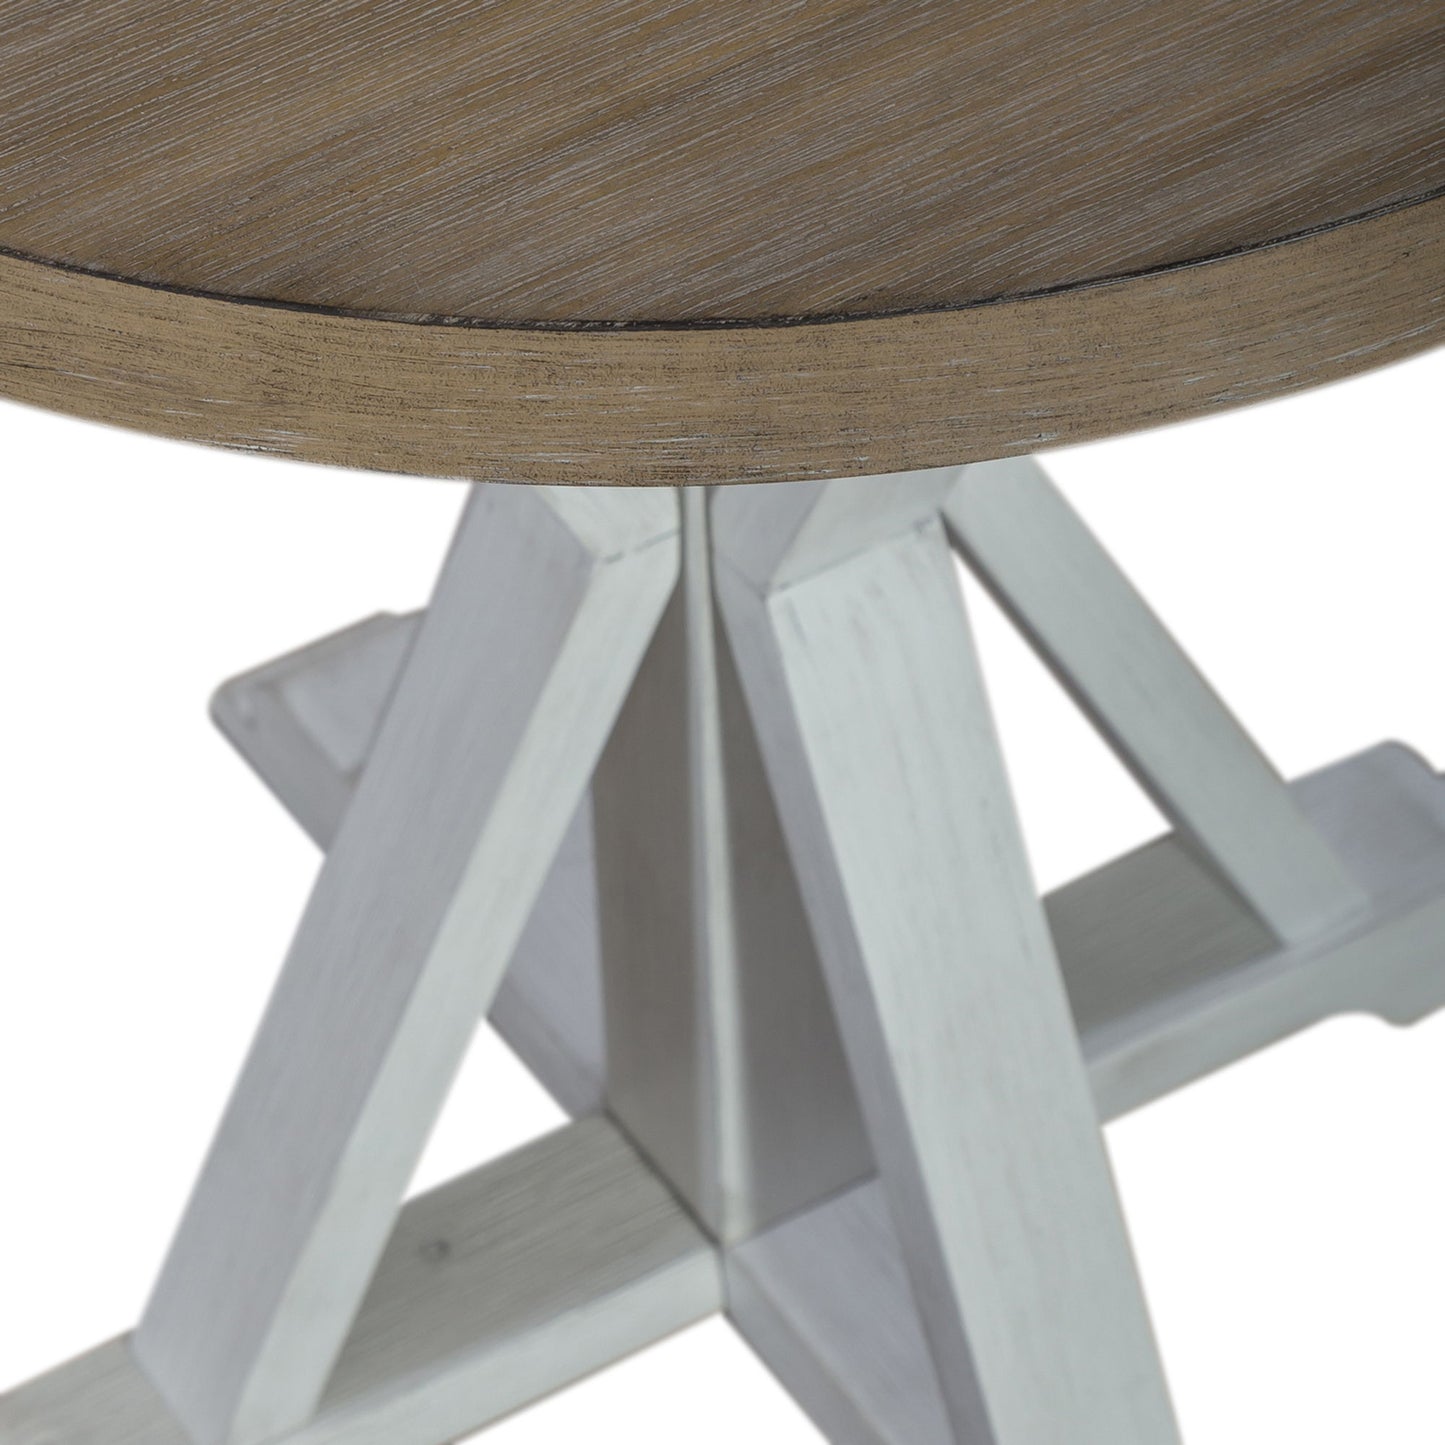 Summerville - Round End Table - White